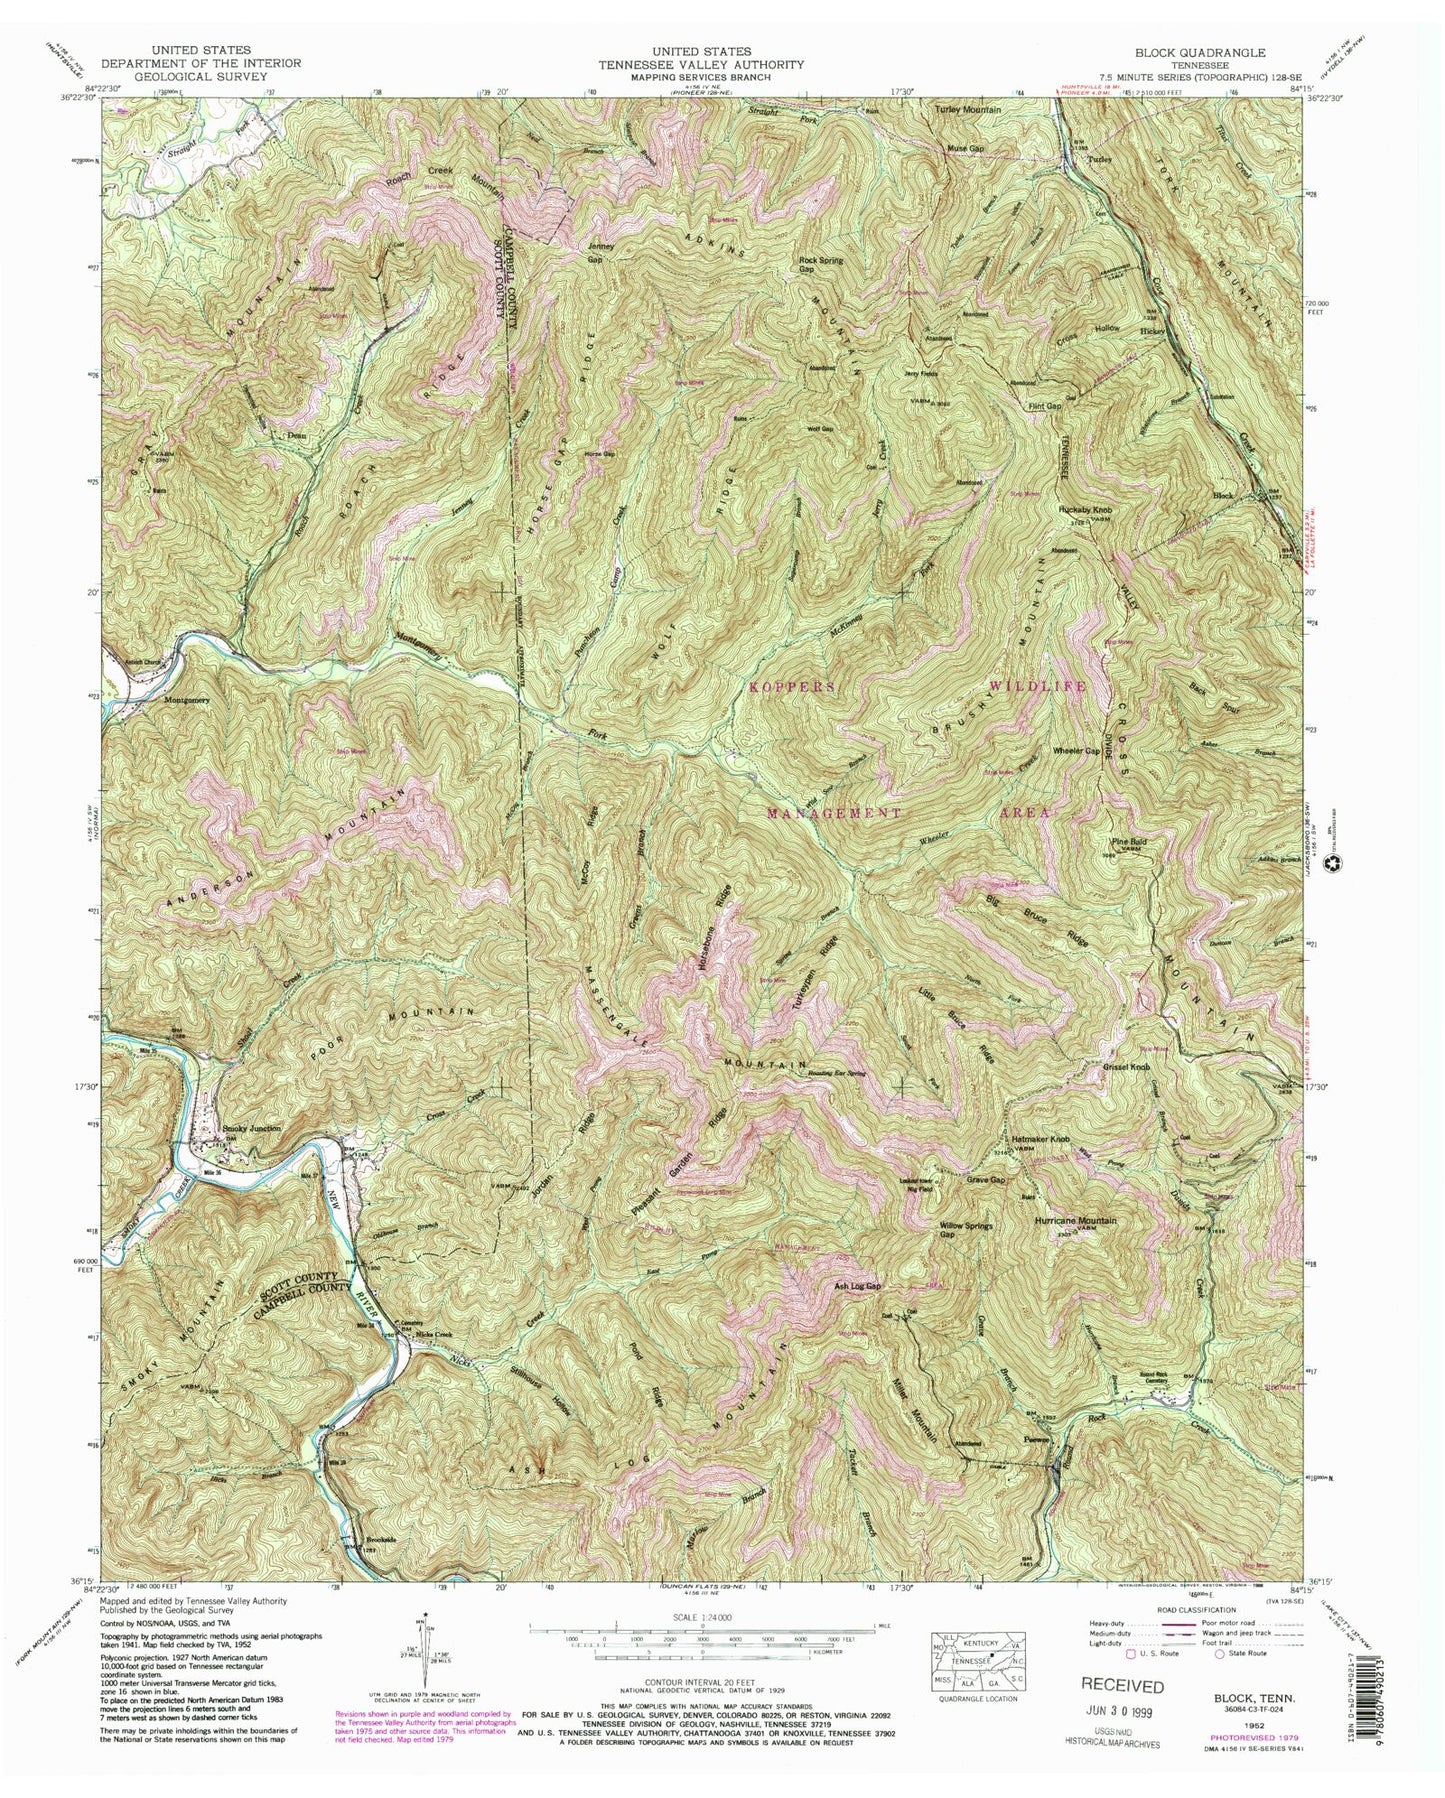 Classic USGS Block Tennessee 7.5'x7.5' Topo Map Image